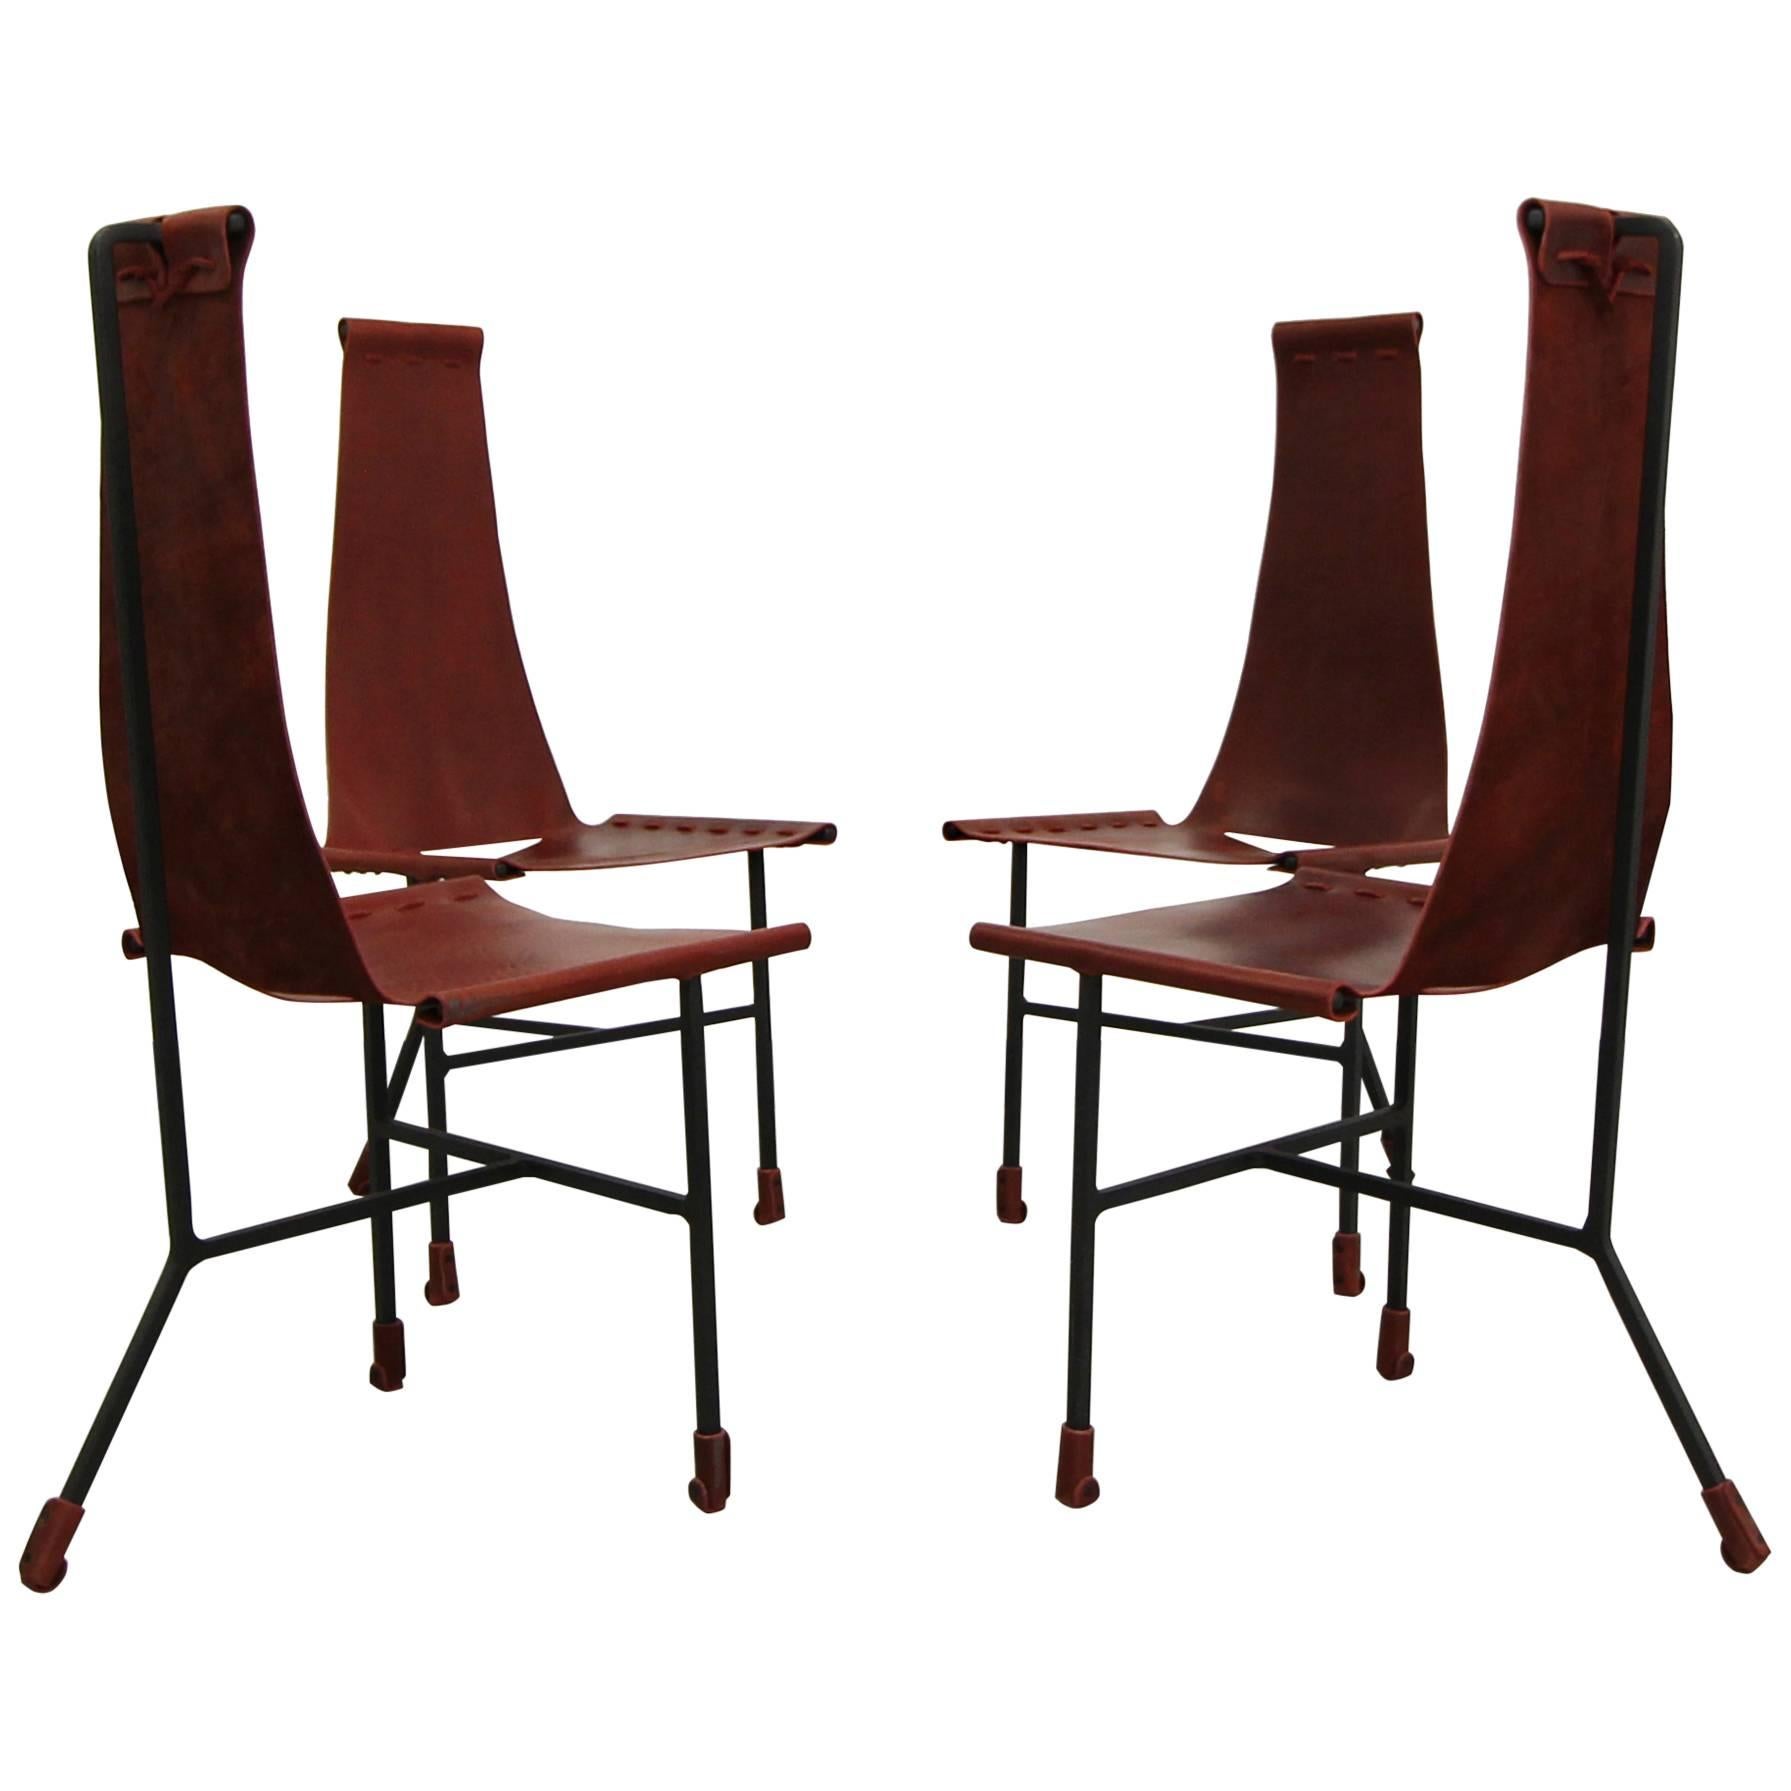 Set of Four Custom Latigo Leather and Steel Dining Chairs by Daniel Wenger